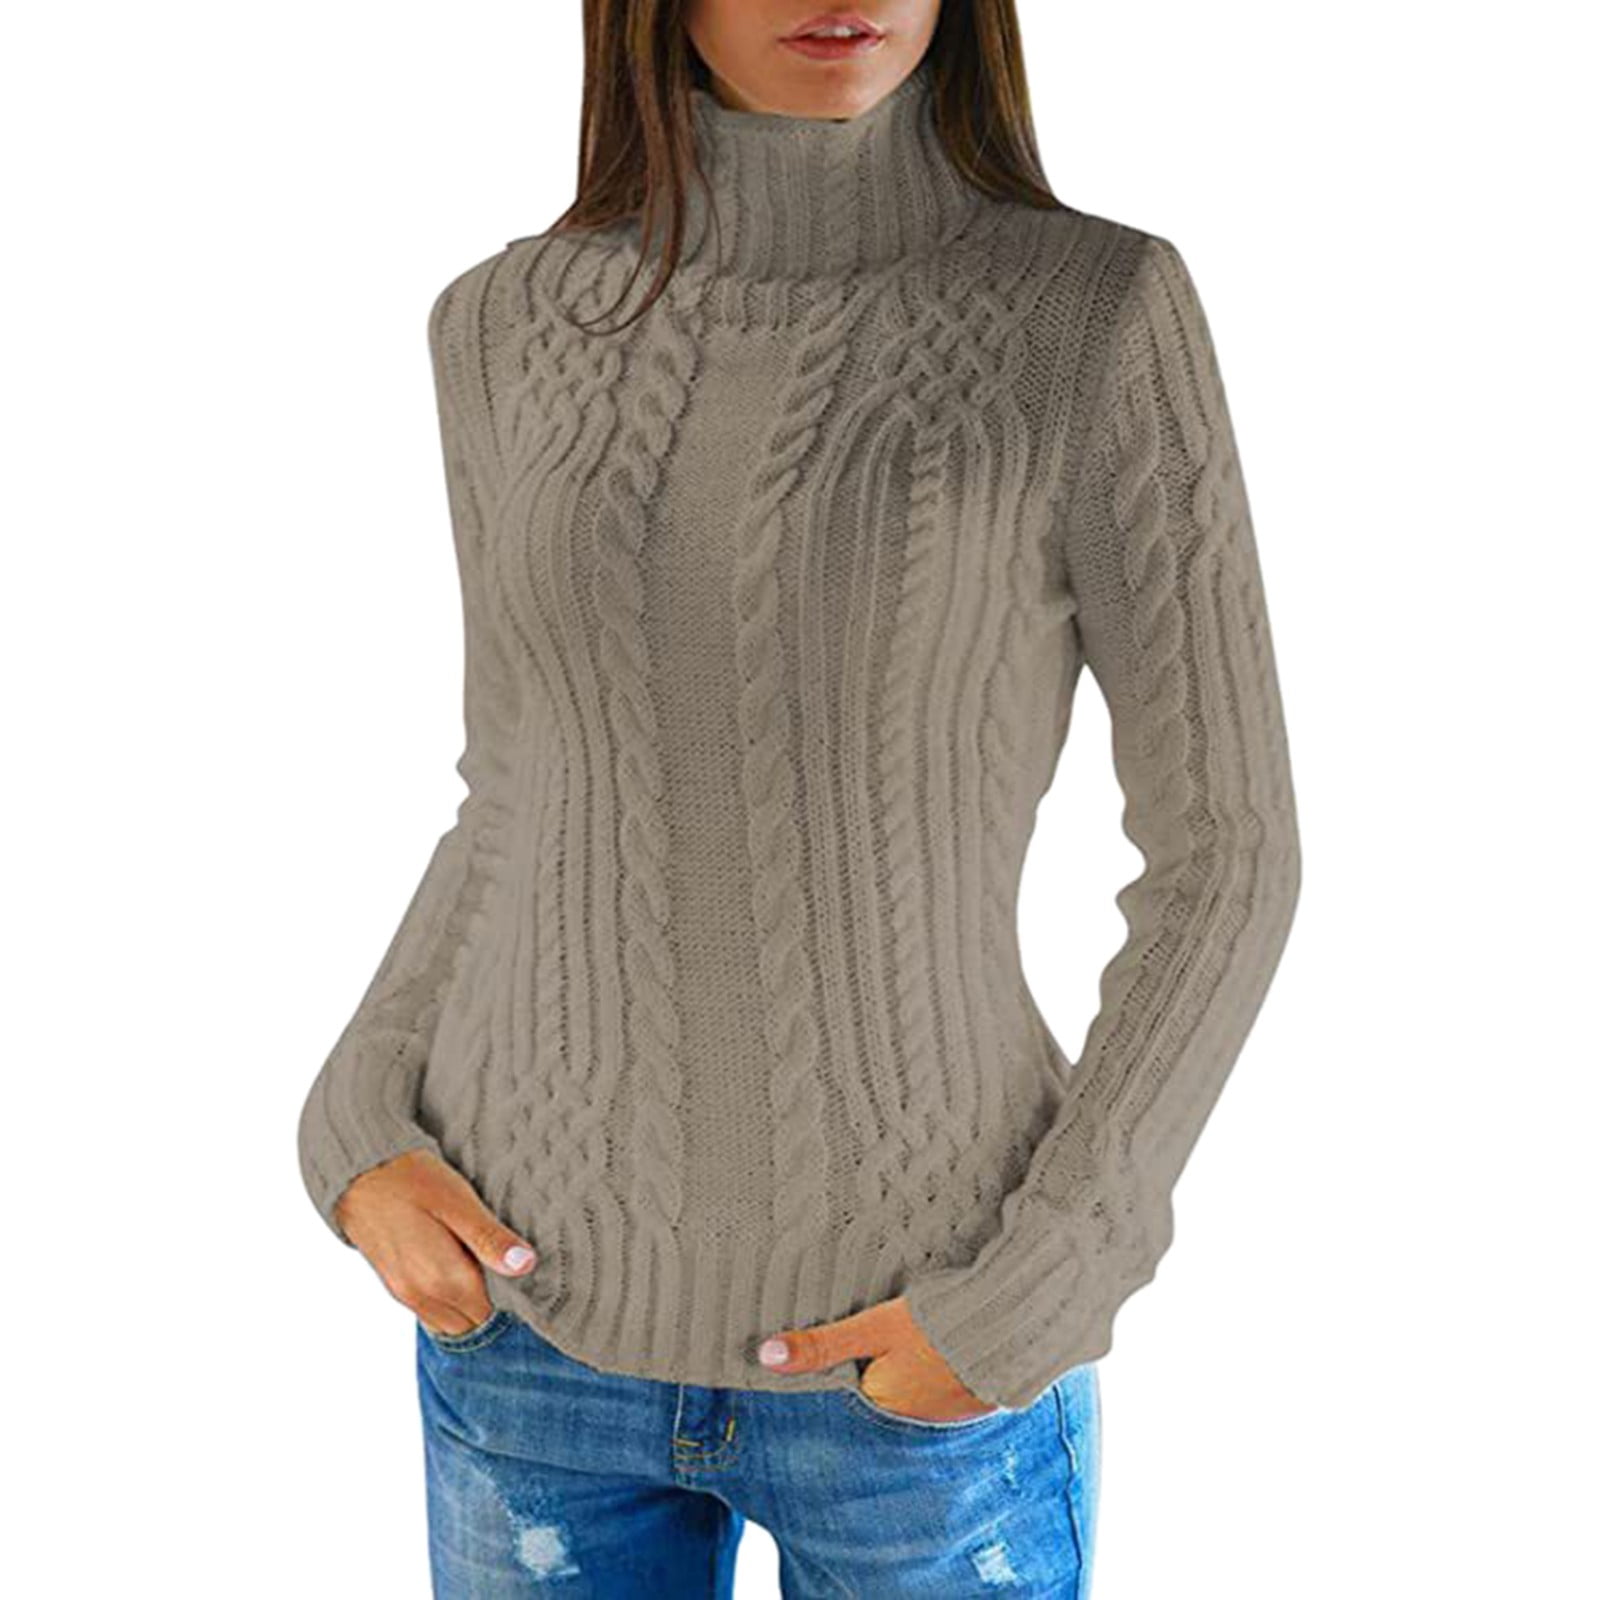 Entyinea Womens Casual Sweaters Fall Winter Solid Pullover Sweater B M 